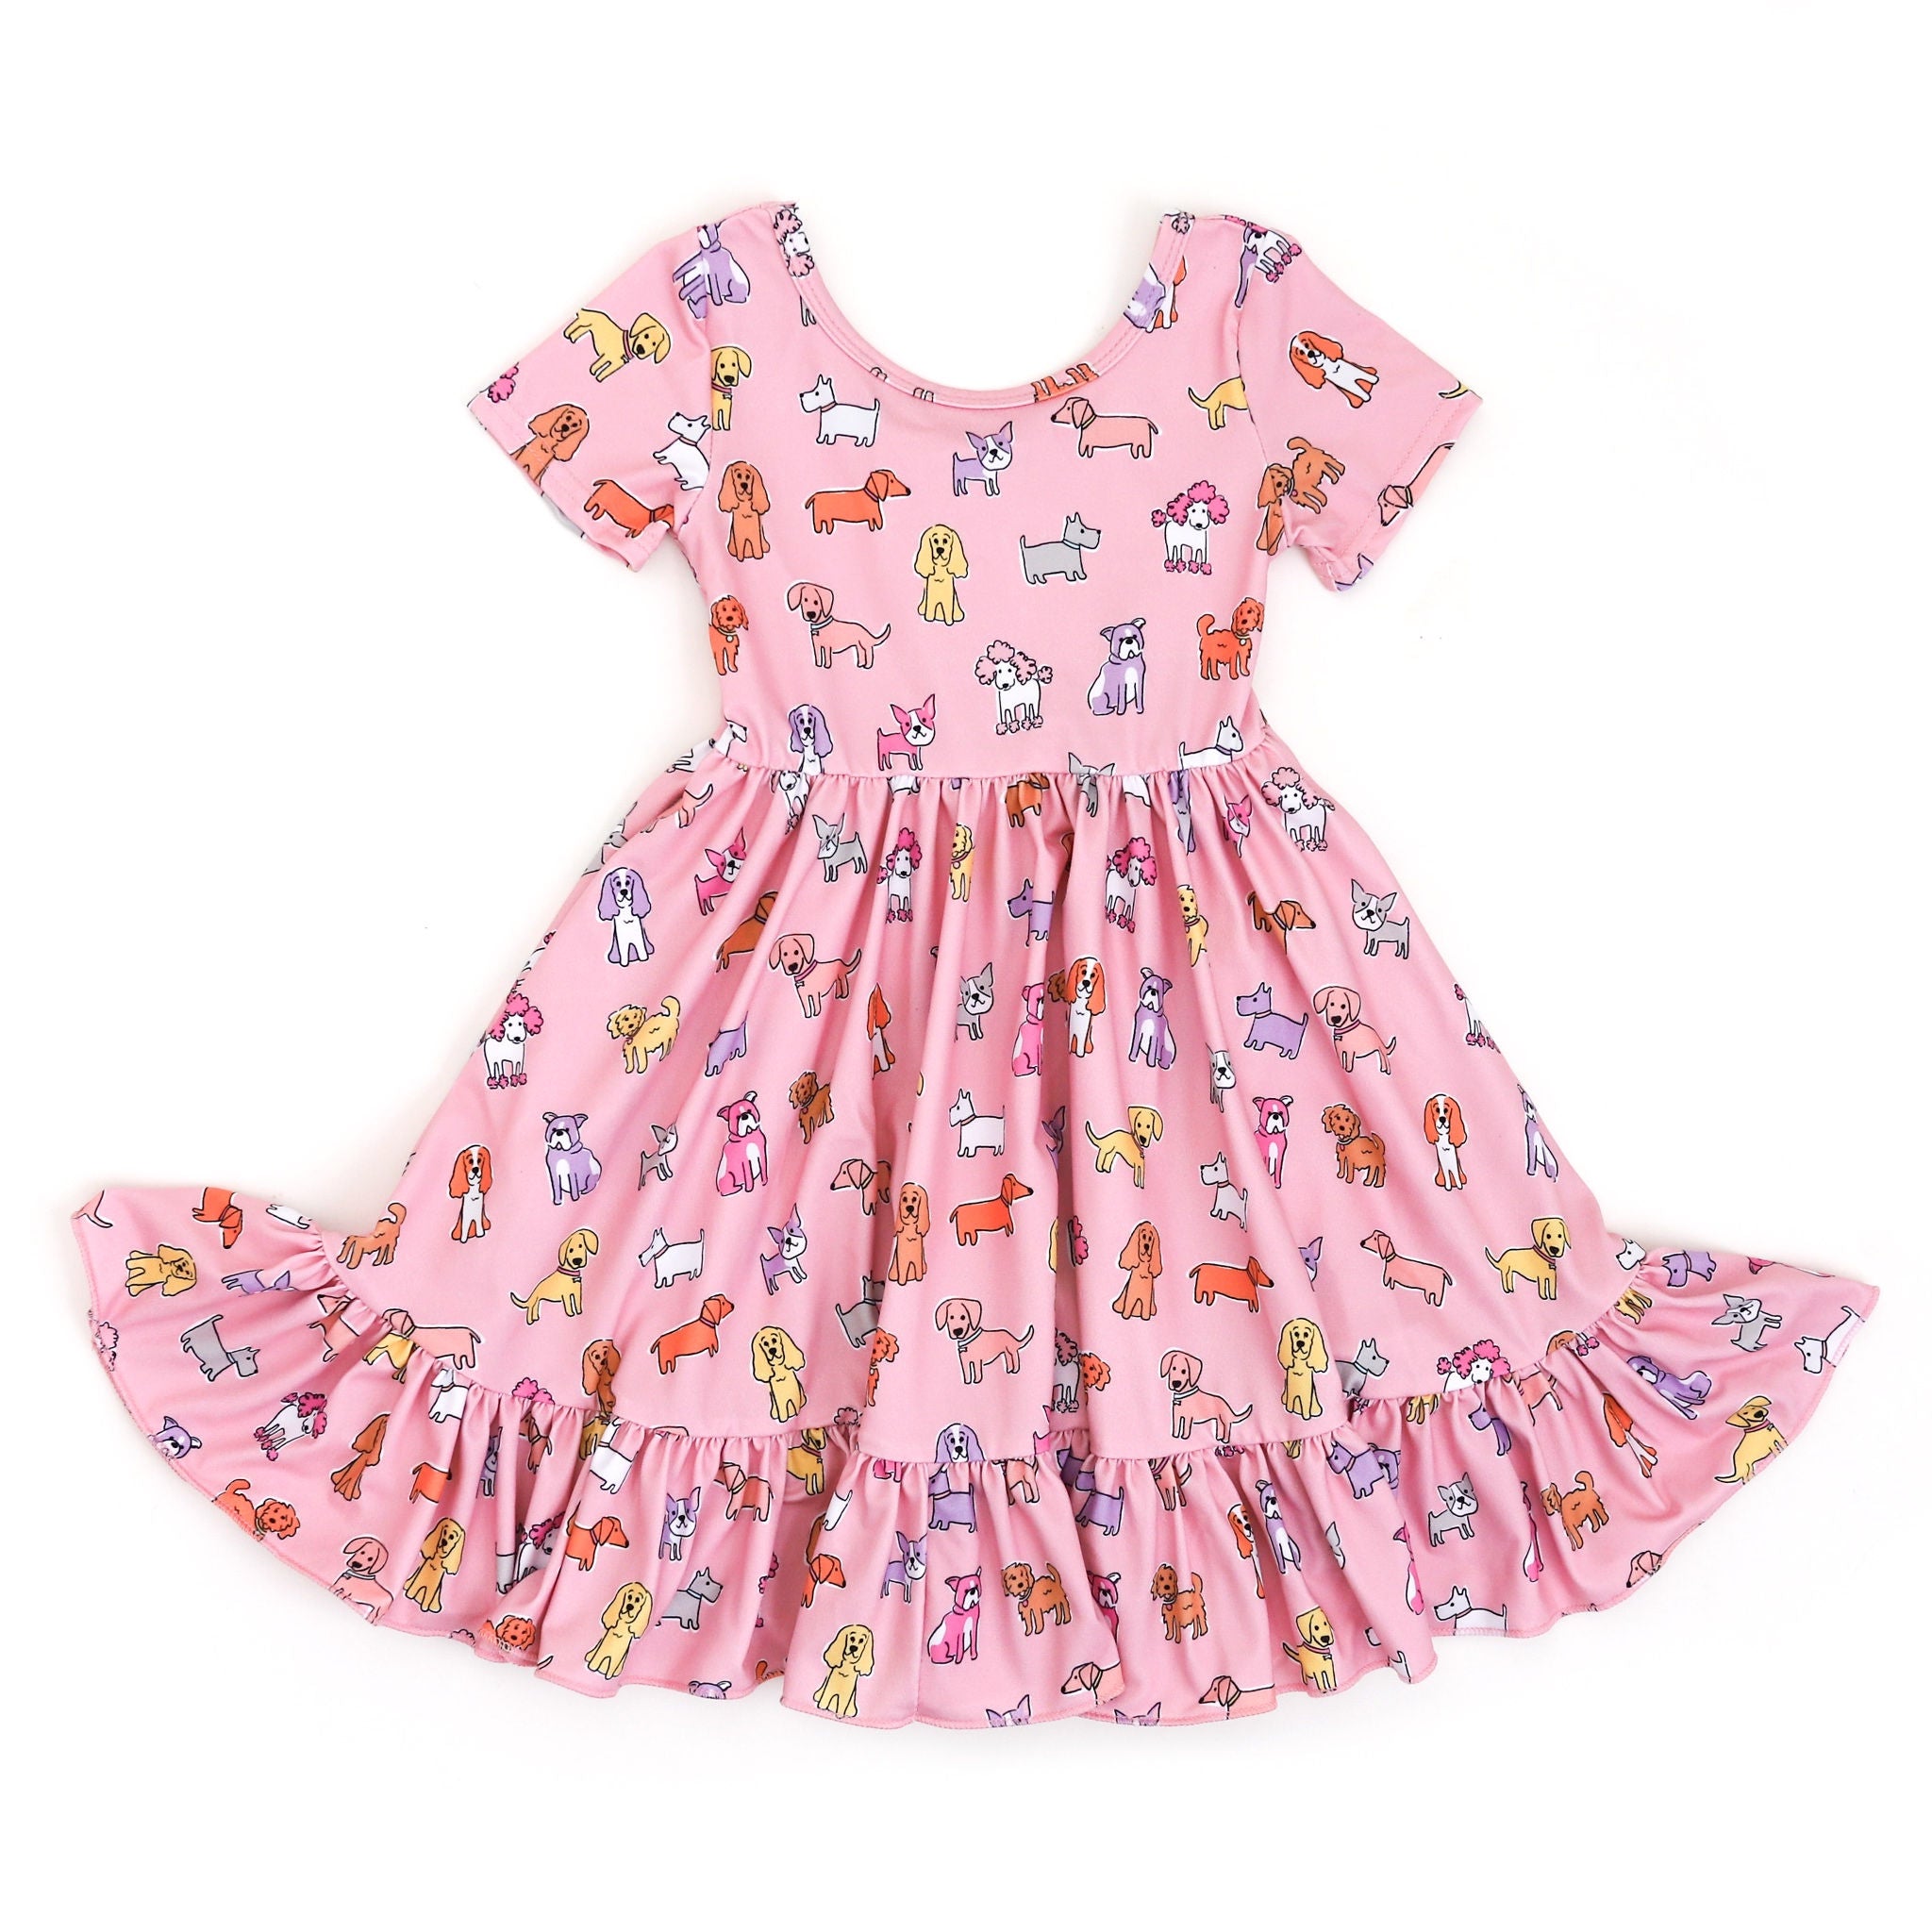 STYLOKIDS - Pink Crepe Girls Frock ( Pack of 1 ) - Buy STYLOKIDS - Pink  Crepe Girls Frock ( Pack of 1 ) Online at Low Price - Snapdeal